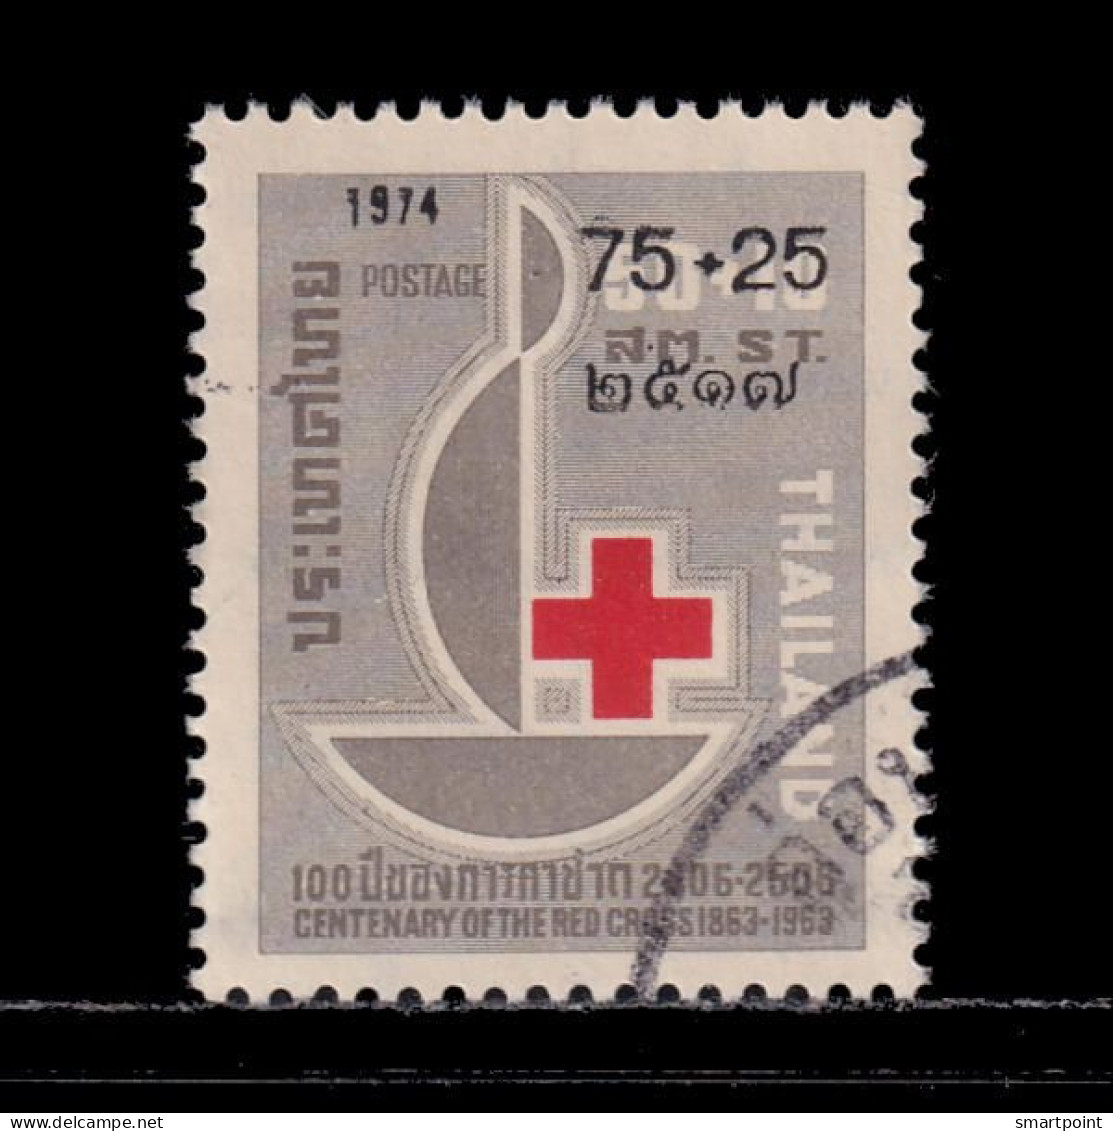 Thailand Stamp 1975 1974 Red Cross Provisional 75+25 Satang - Used - Thailand